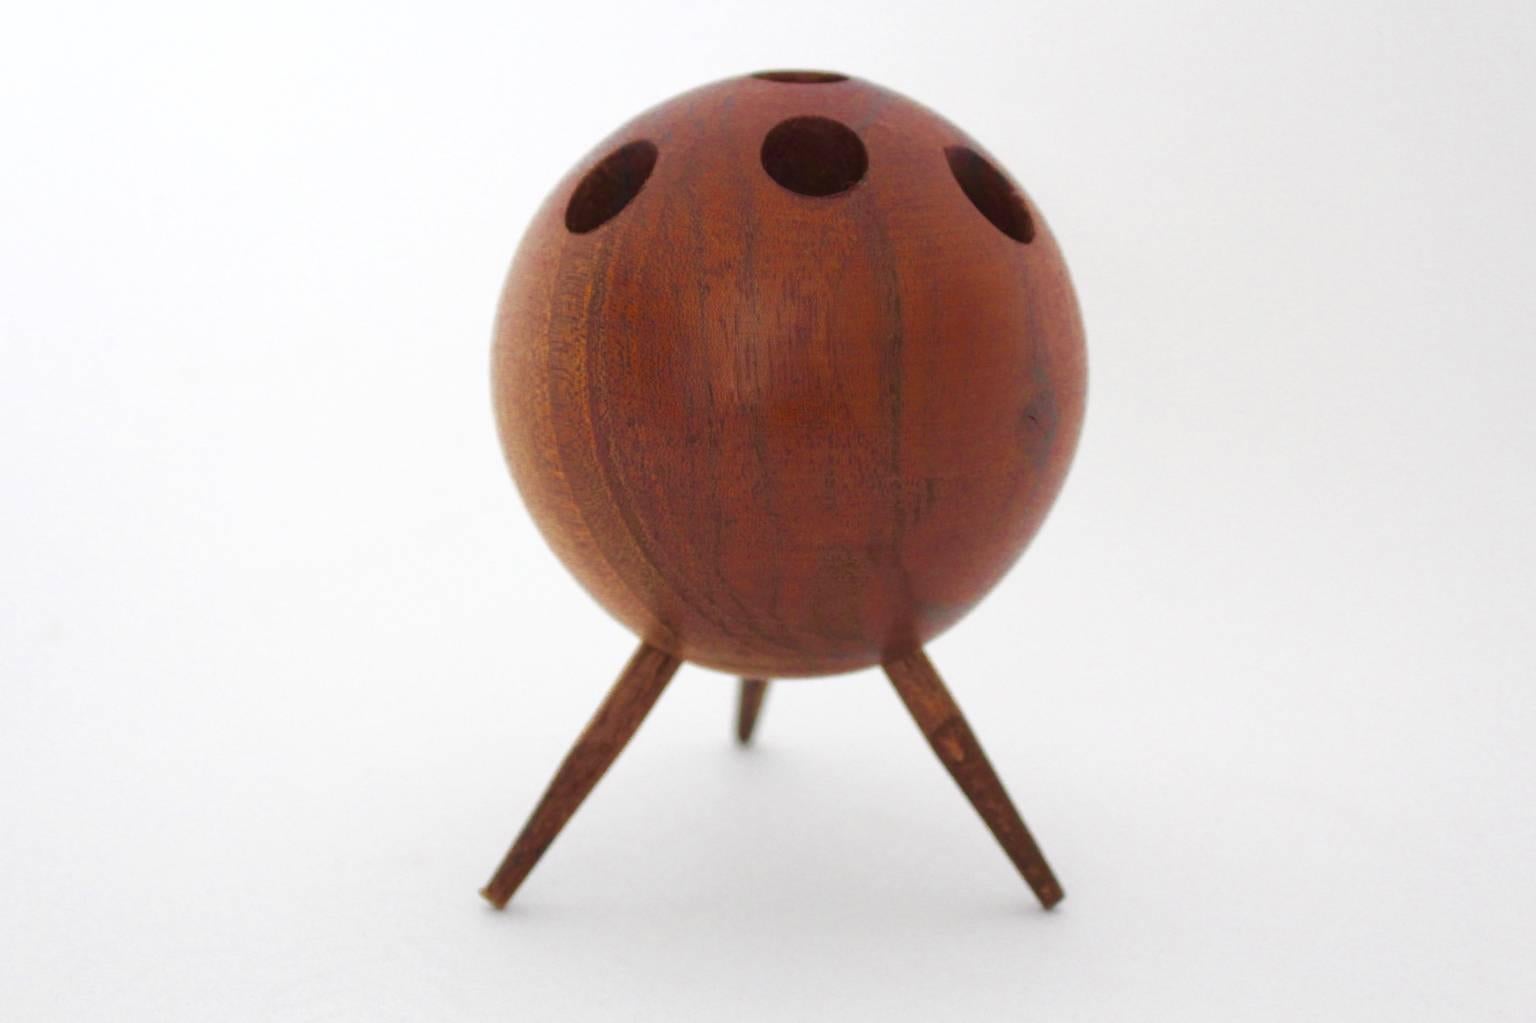 The tripod candleholder was made of walnut and shows seven holes for small candles.
This piece was designed circa 1960.
The candleholder is in very good condition.